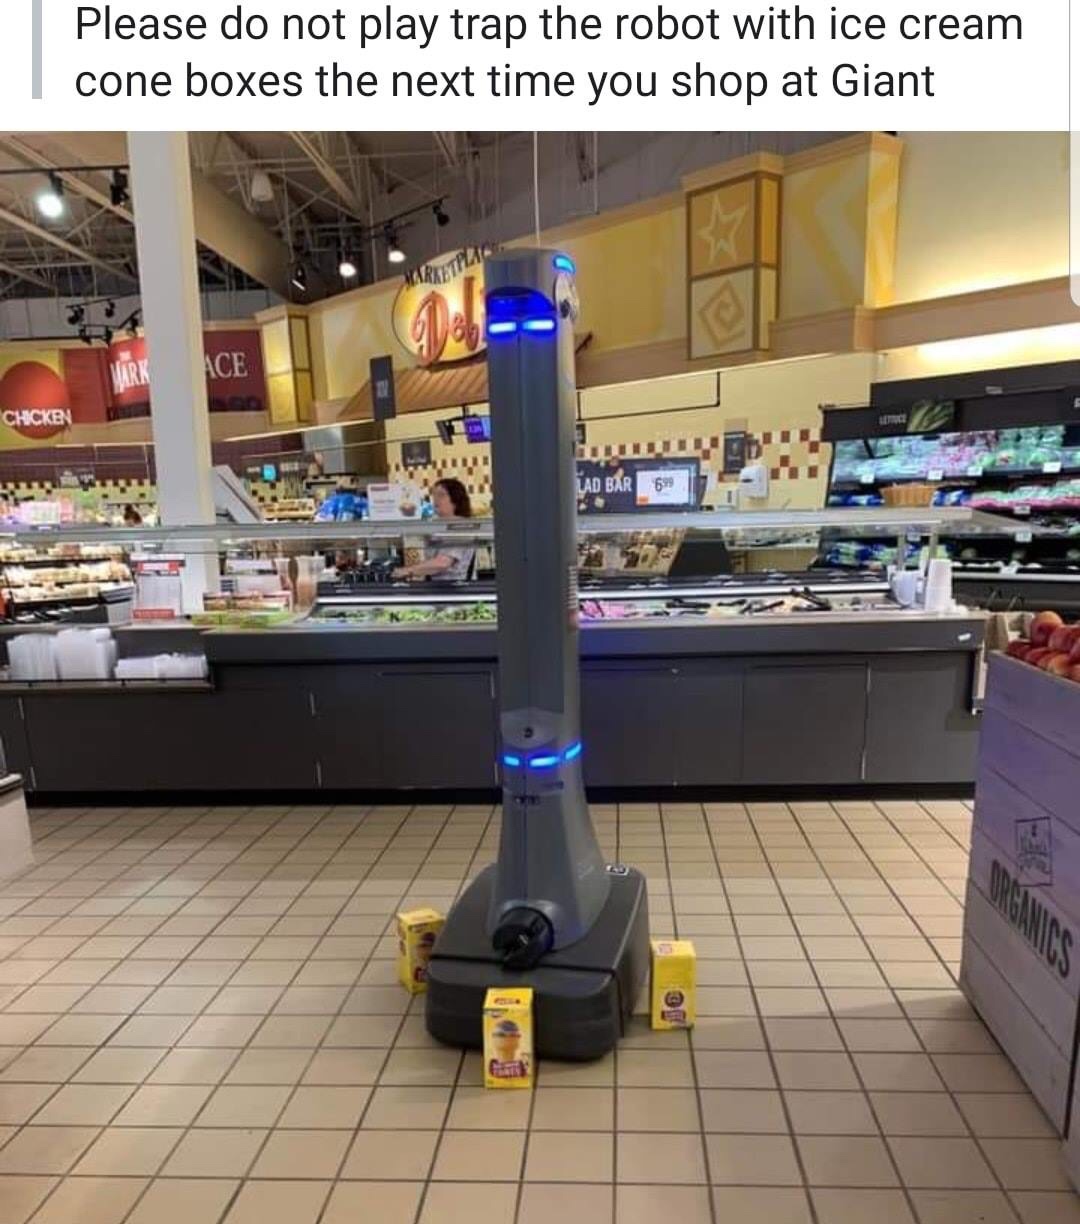 marty the robot meme - Please do not play trap the robot with ice cream cone boxes the next time you shop at Giant Ace Chicken Lad Bar 699